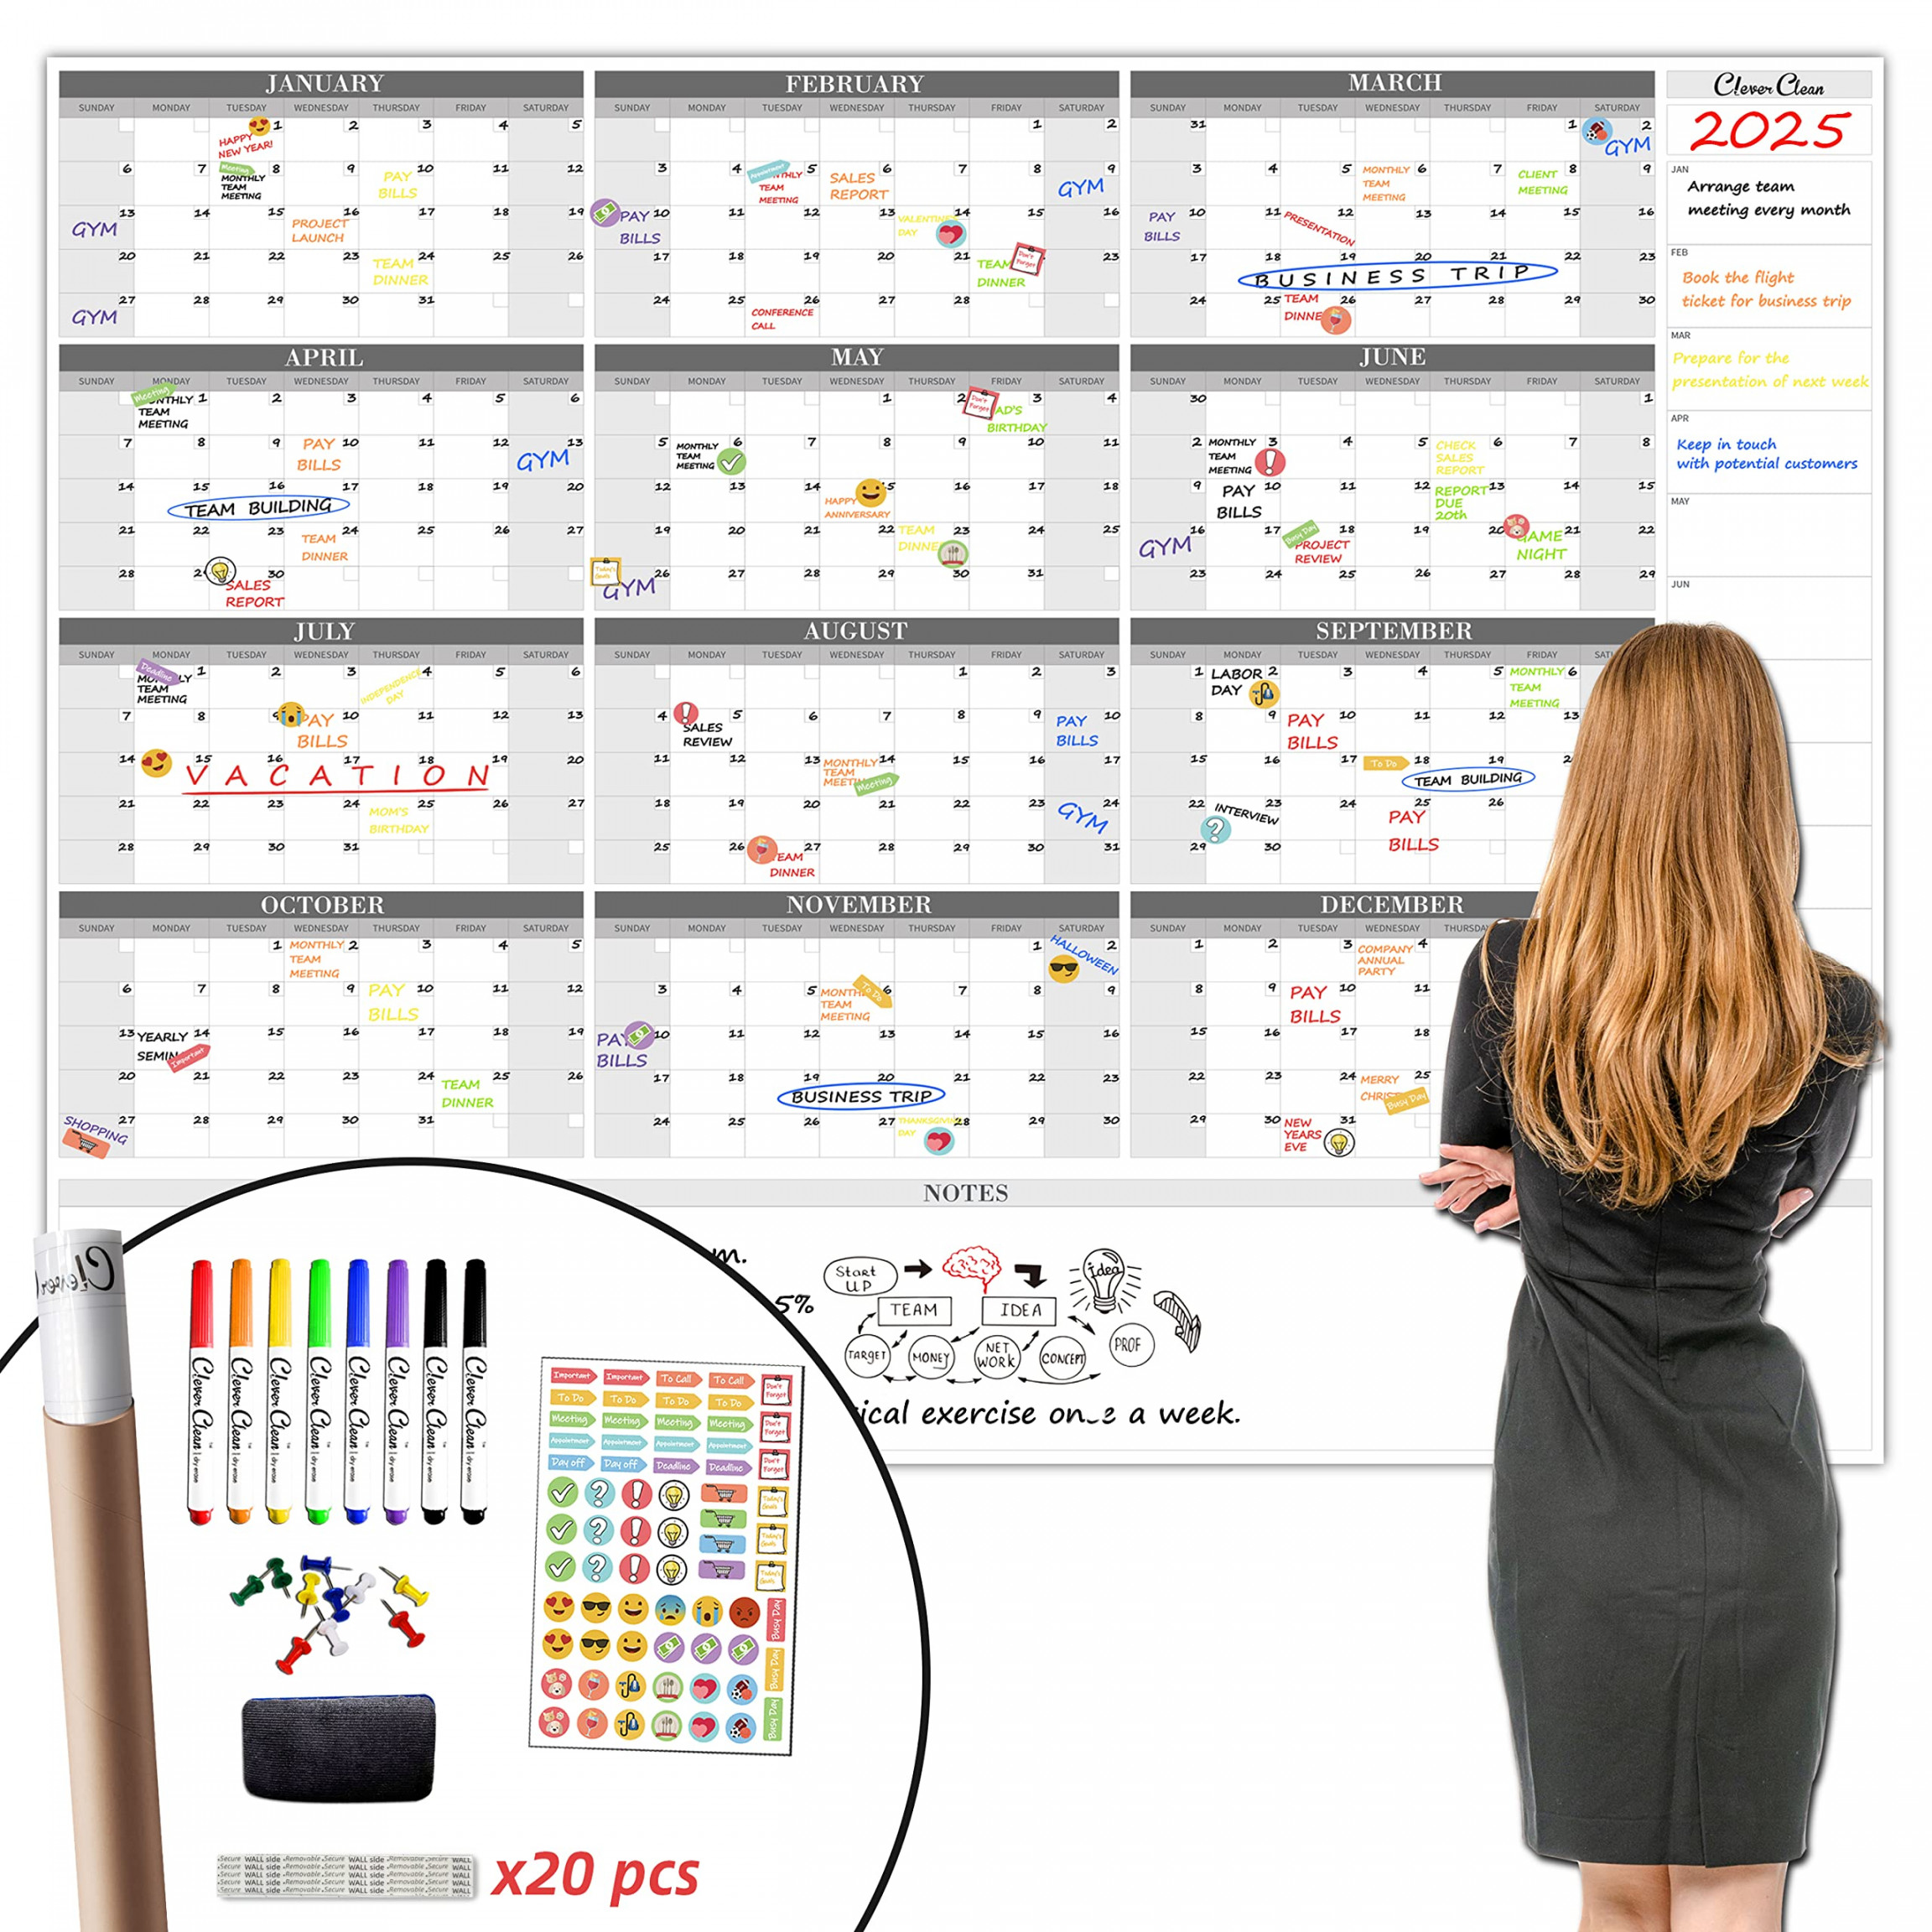 Jumbo Dry Erase Wall Calendar - "x"  Undated Yearly Planner for  Home, Office, School ProjectSee more Jumbo Dry Erase Wall Calendar -  "x"